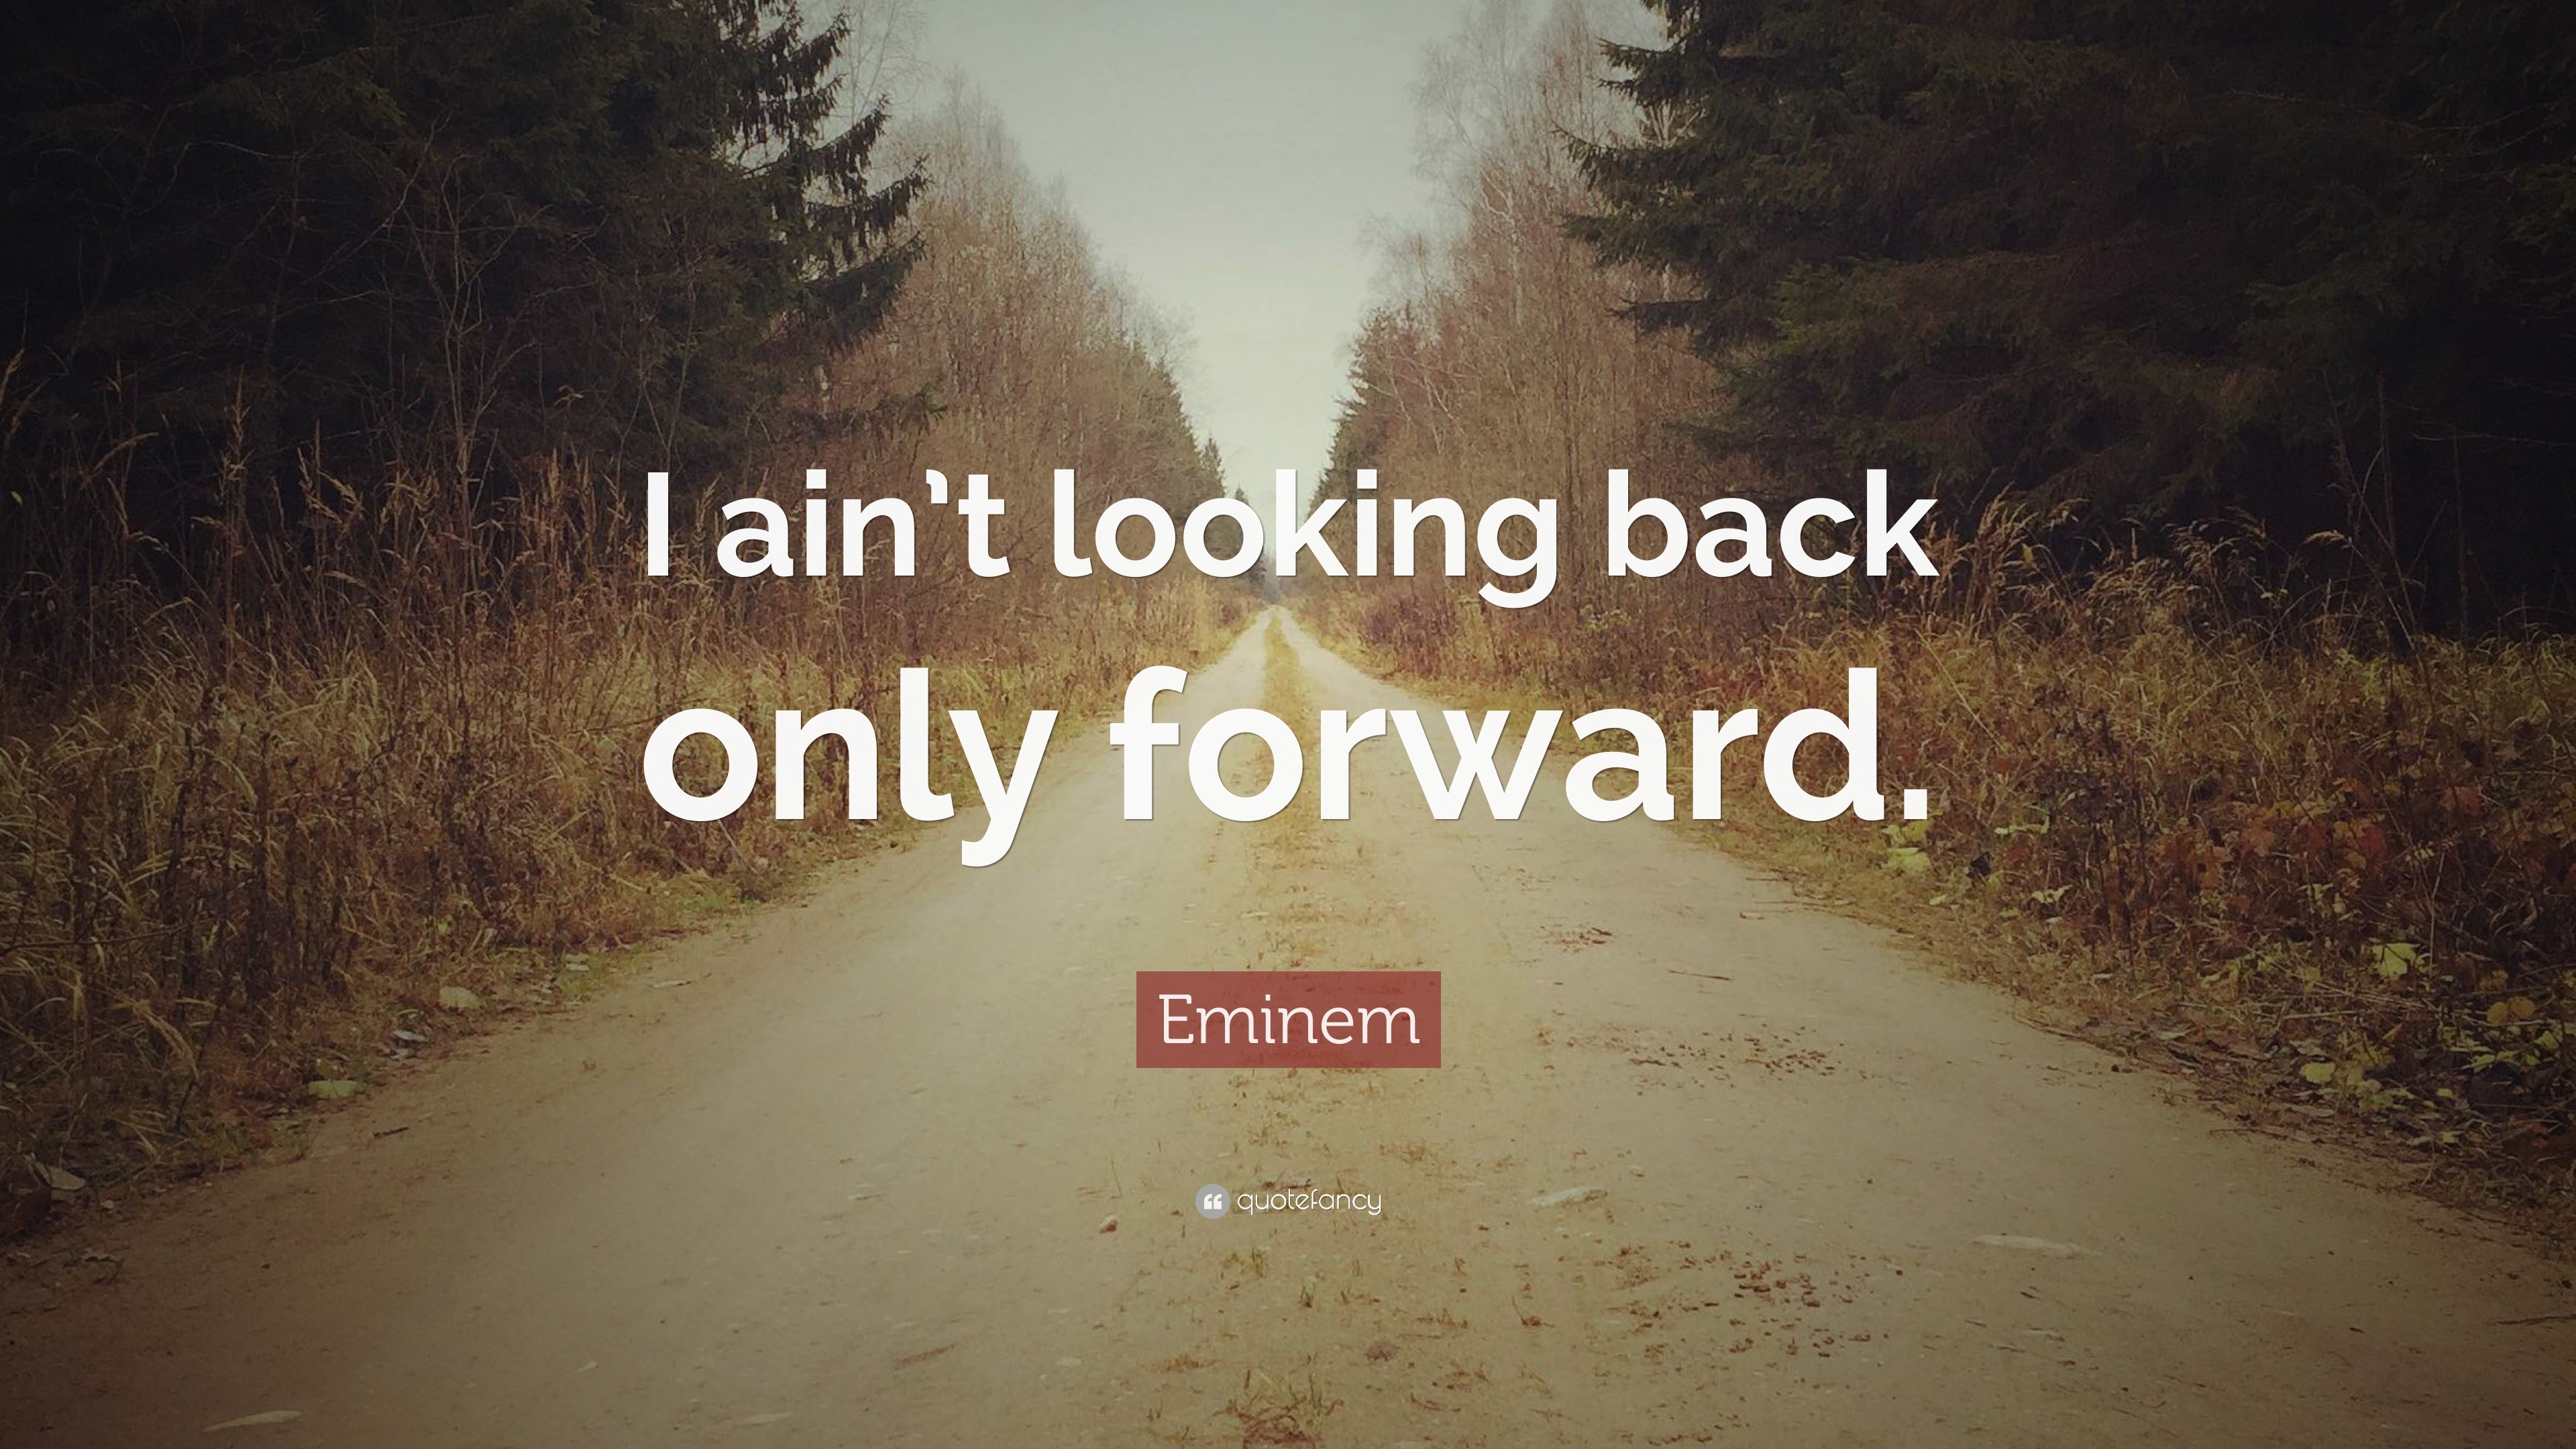 Eminem Quote: “I ain’t looking back only forward.”